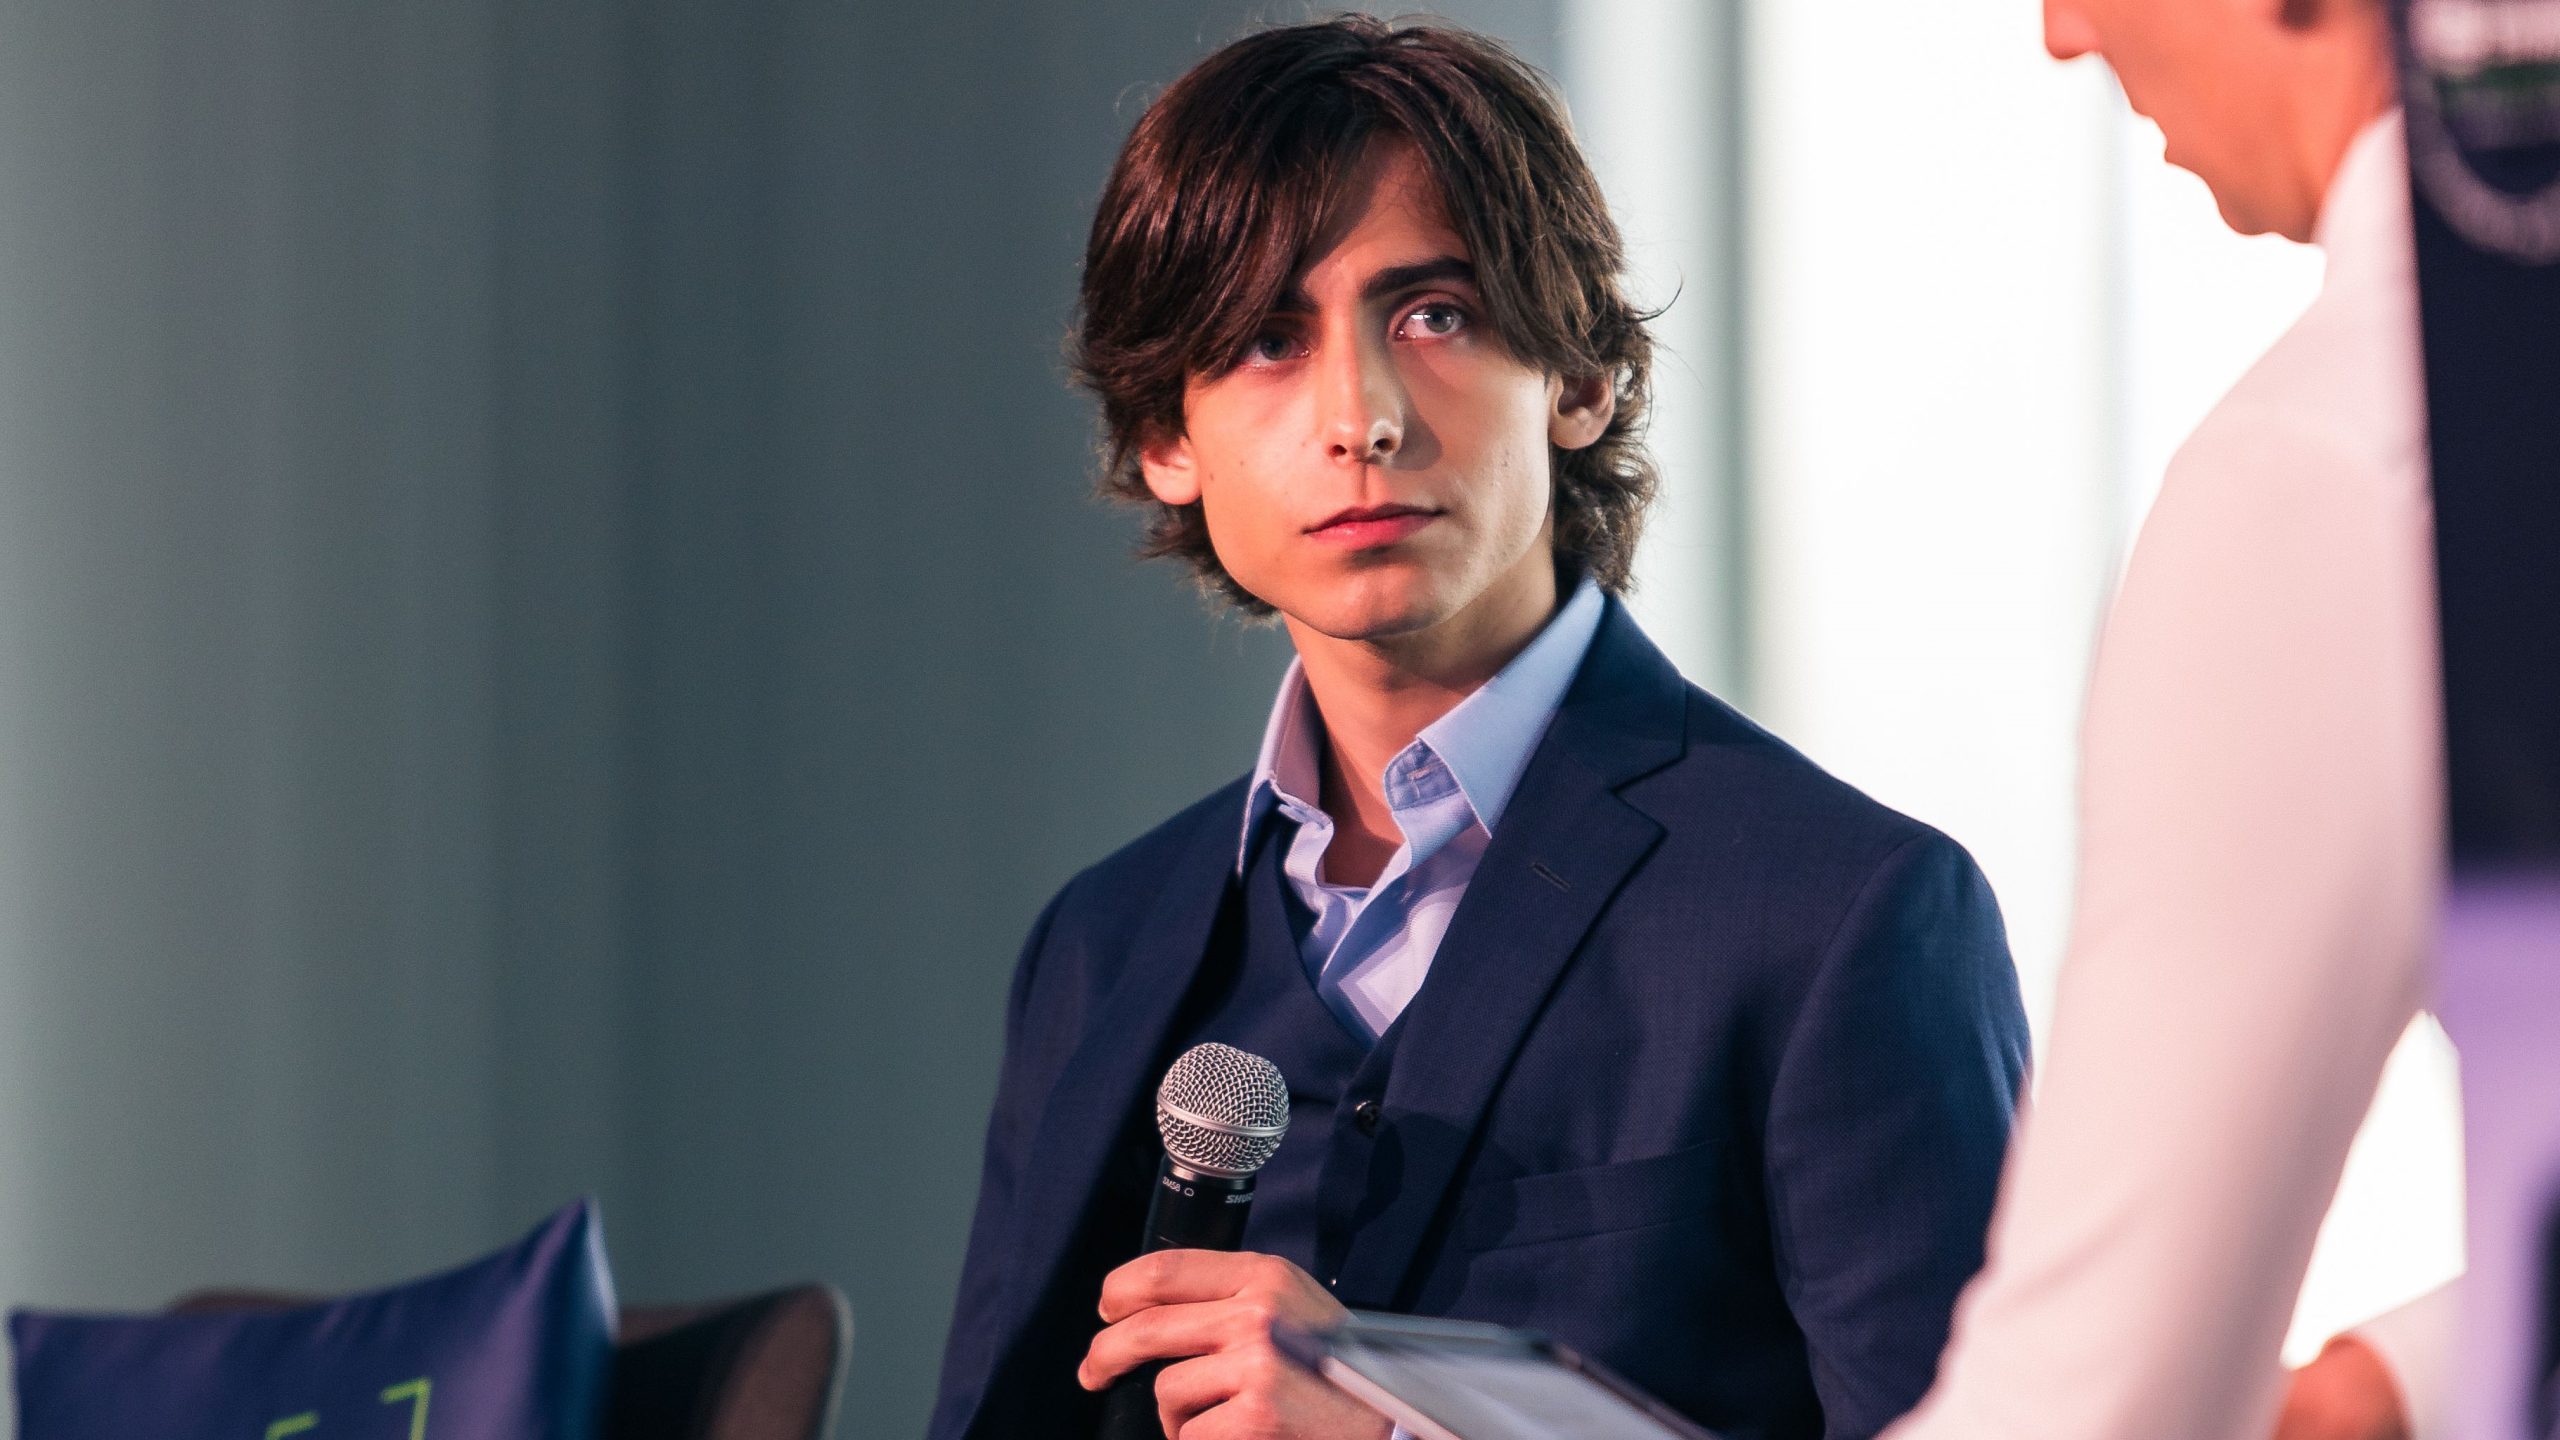 Watch: Aidan Gallagher discusses how he fights climate change at RACC Live!